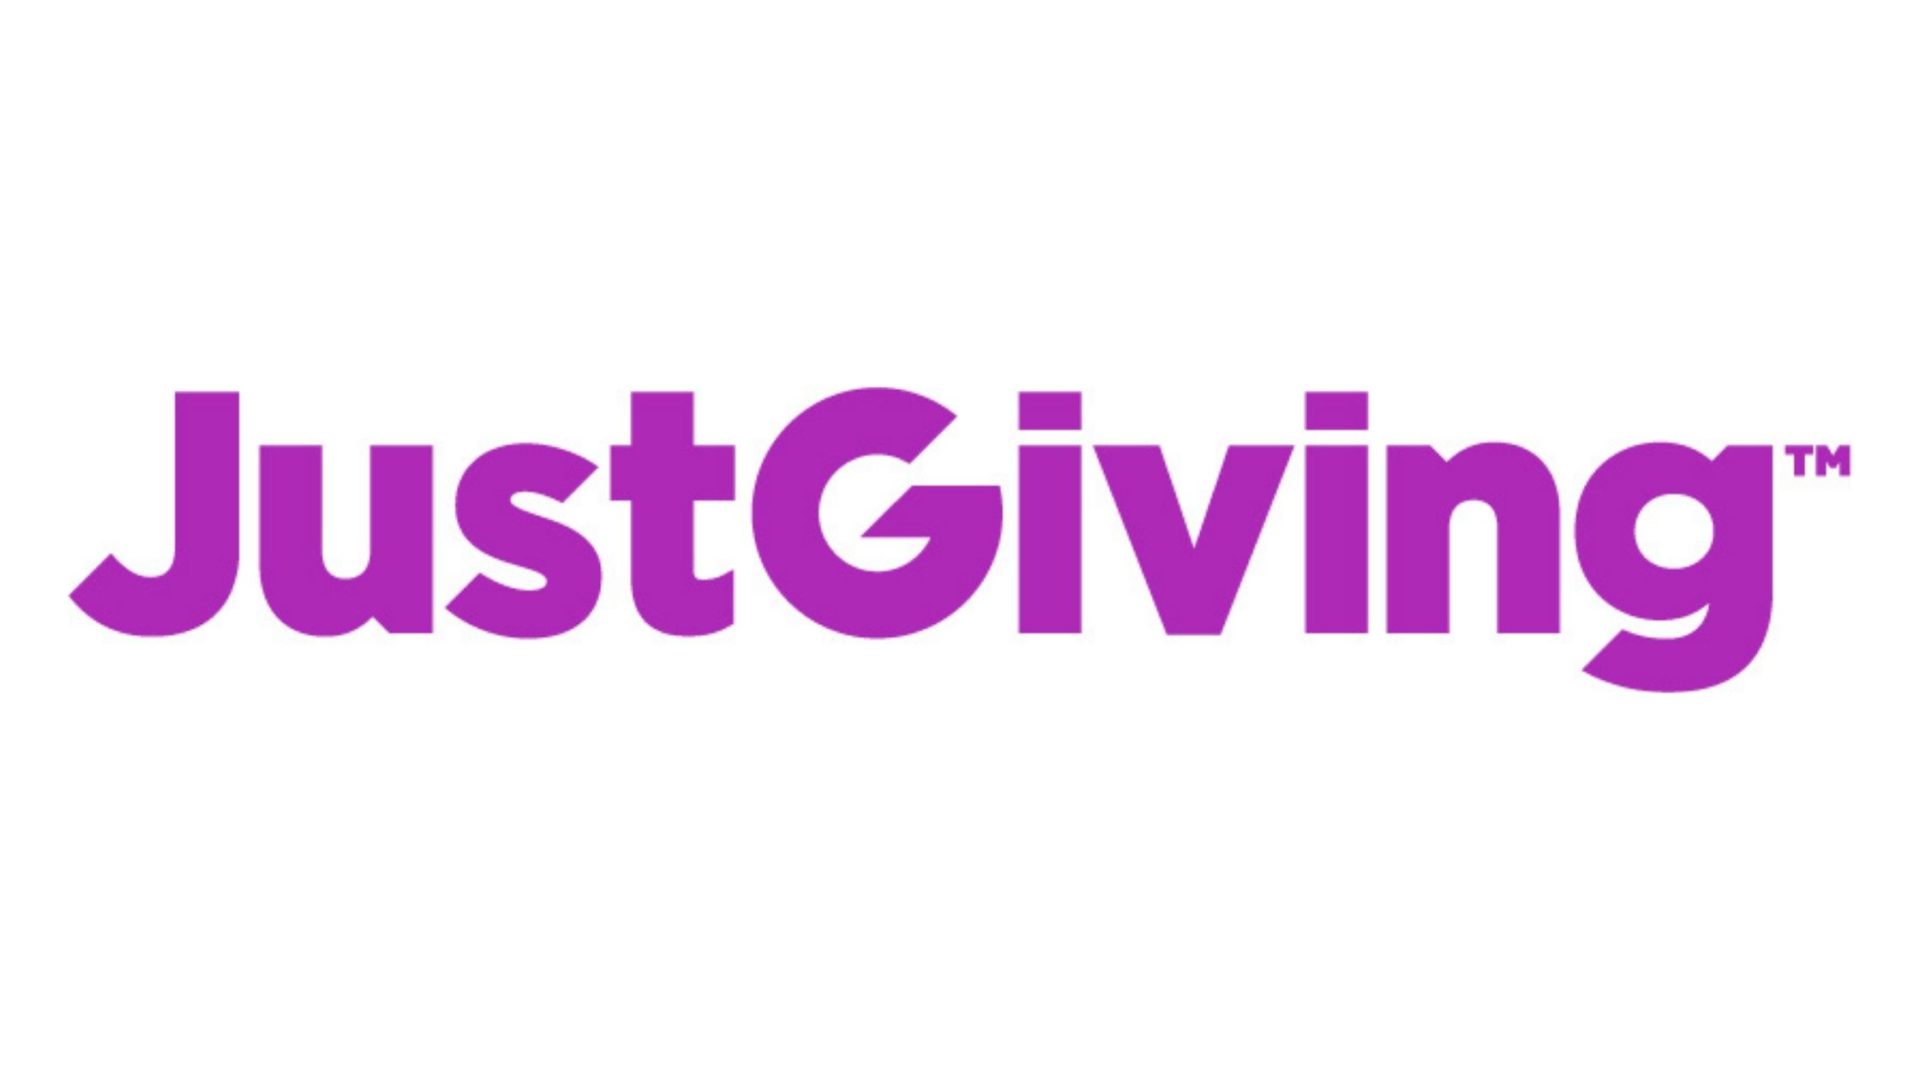 Just Giving logo. Purple text that reads 'Just Giving TM'